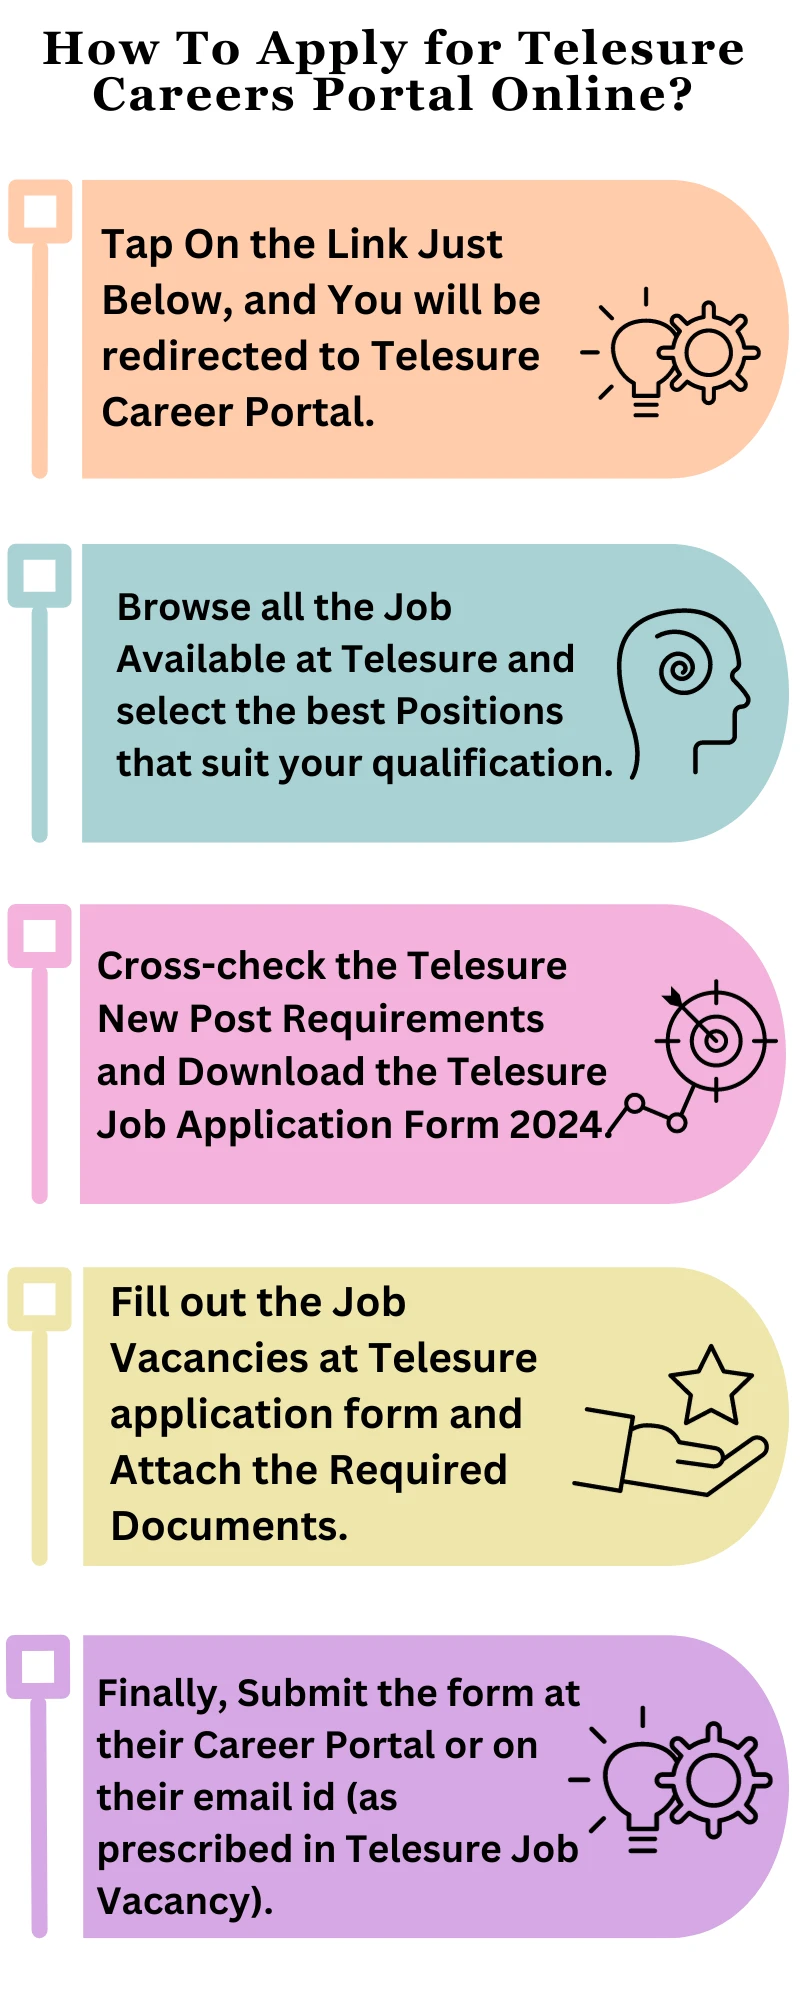 How To Apply for Telesure Careers Portal Online?